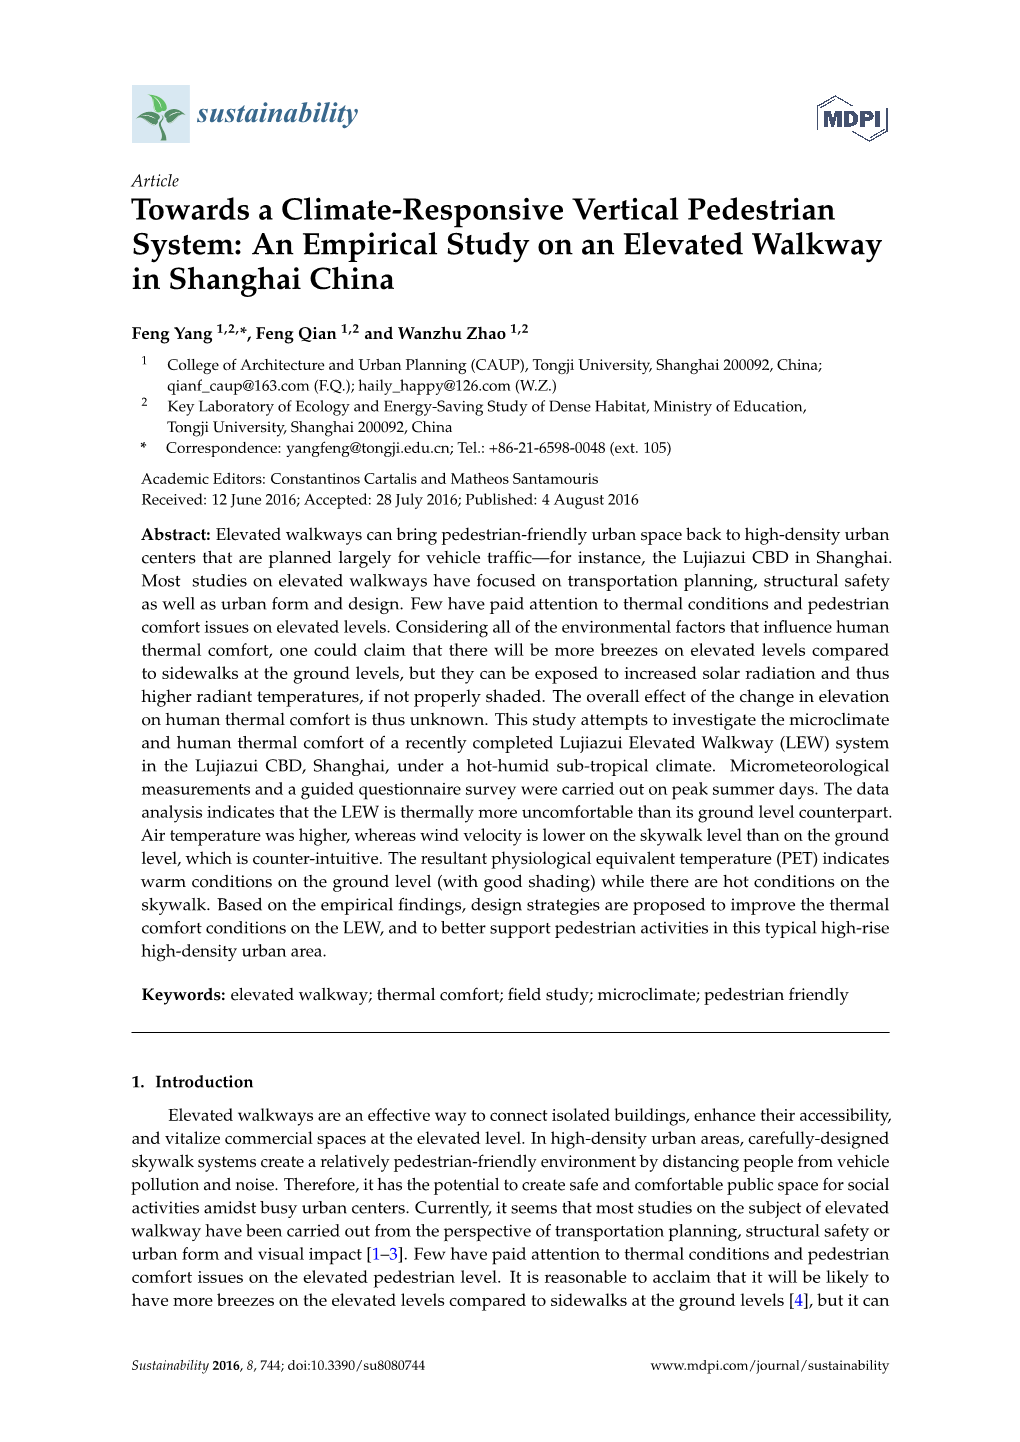 An Empirical Study on an Elevated Walkway in Shanghai China